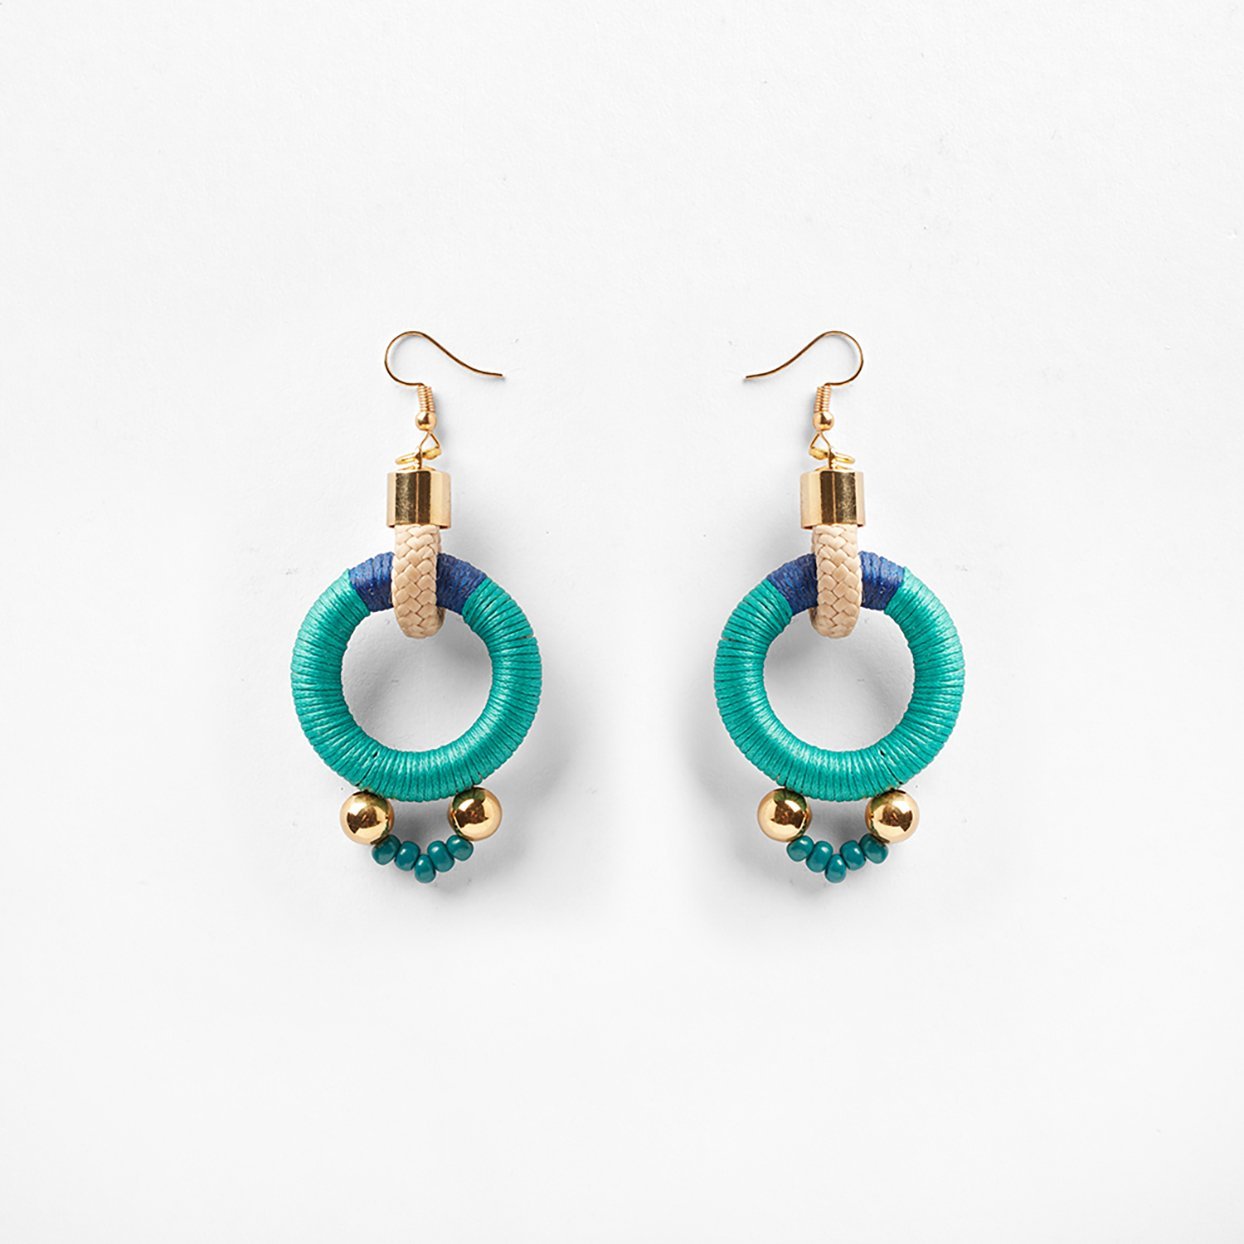 Circular blue and aqua rope earrings featuring a sleek s-hook clasp for secure fastening. The vibrant colors of blue and aqua intertwine beautifully, creating a striking visual contrast. Delicate beads embellish the bottom of the earrings, accented with shimmering gold beads that add a touch of elegance. The circular design offers a modern and versatile aesthetic, suitable for various occasions. 